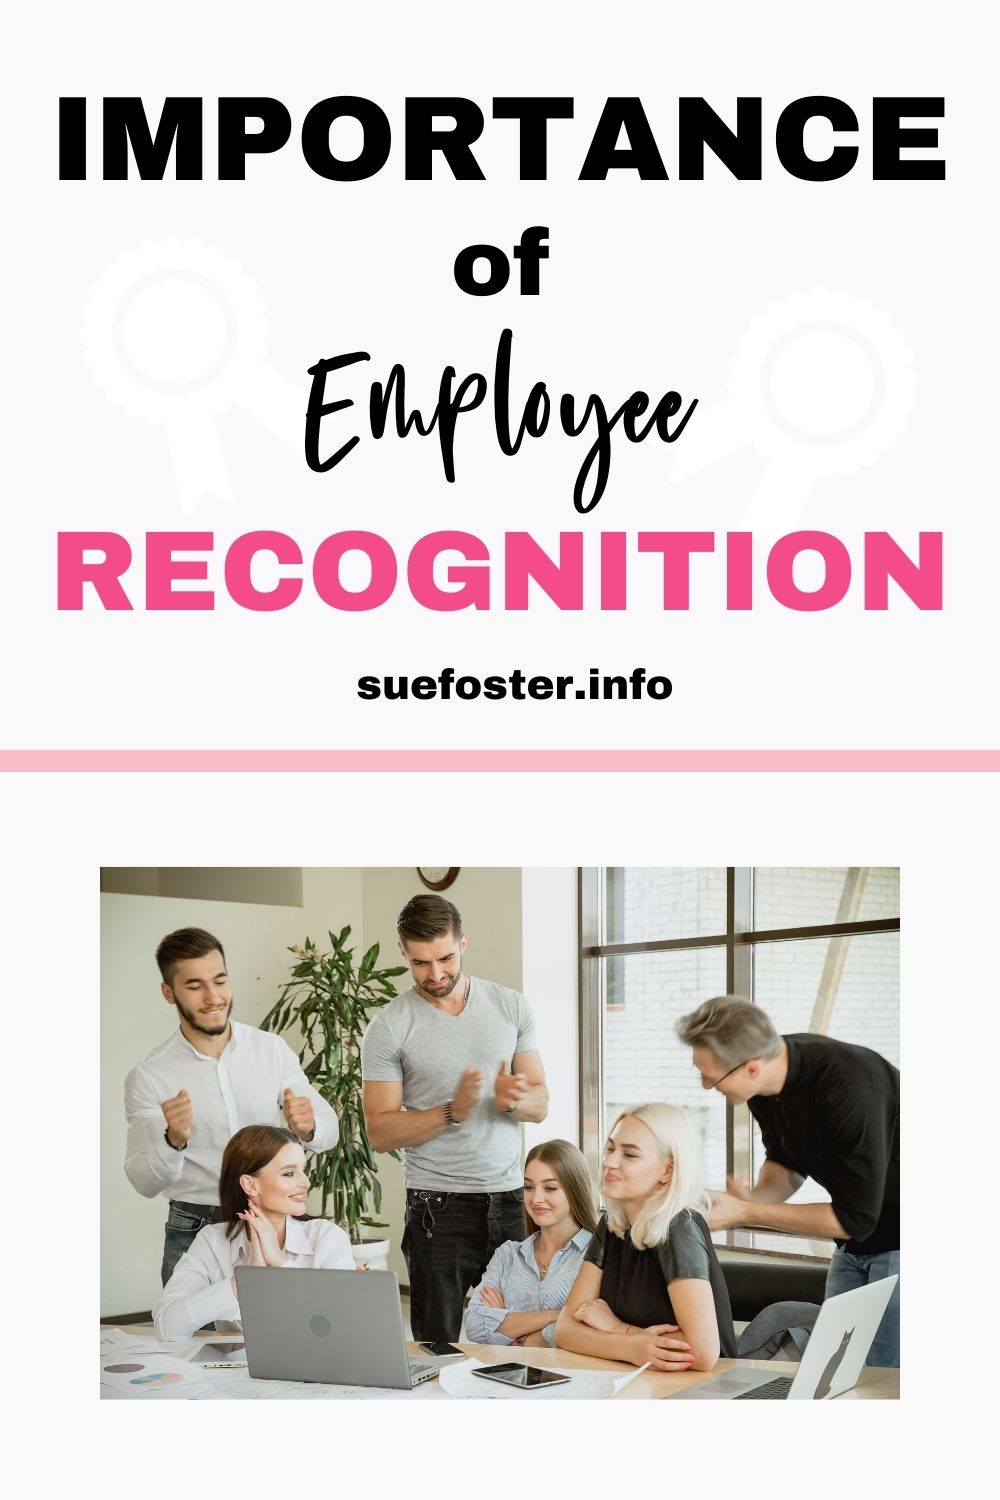 There are many reasons why employee recognition is crucial. This includes improved performance, as employees are driven and motivated to produce outstanding results.